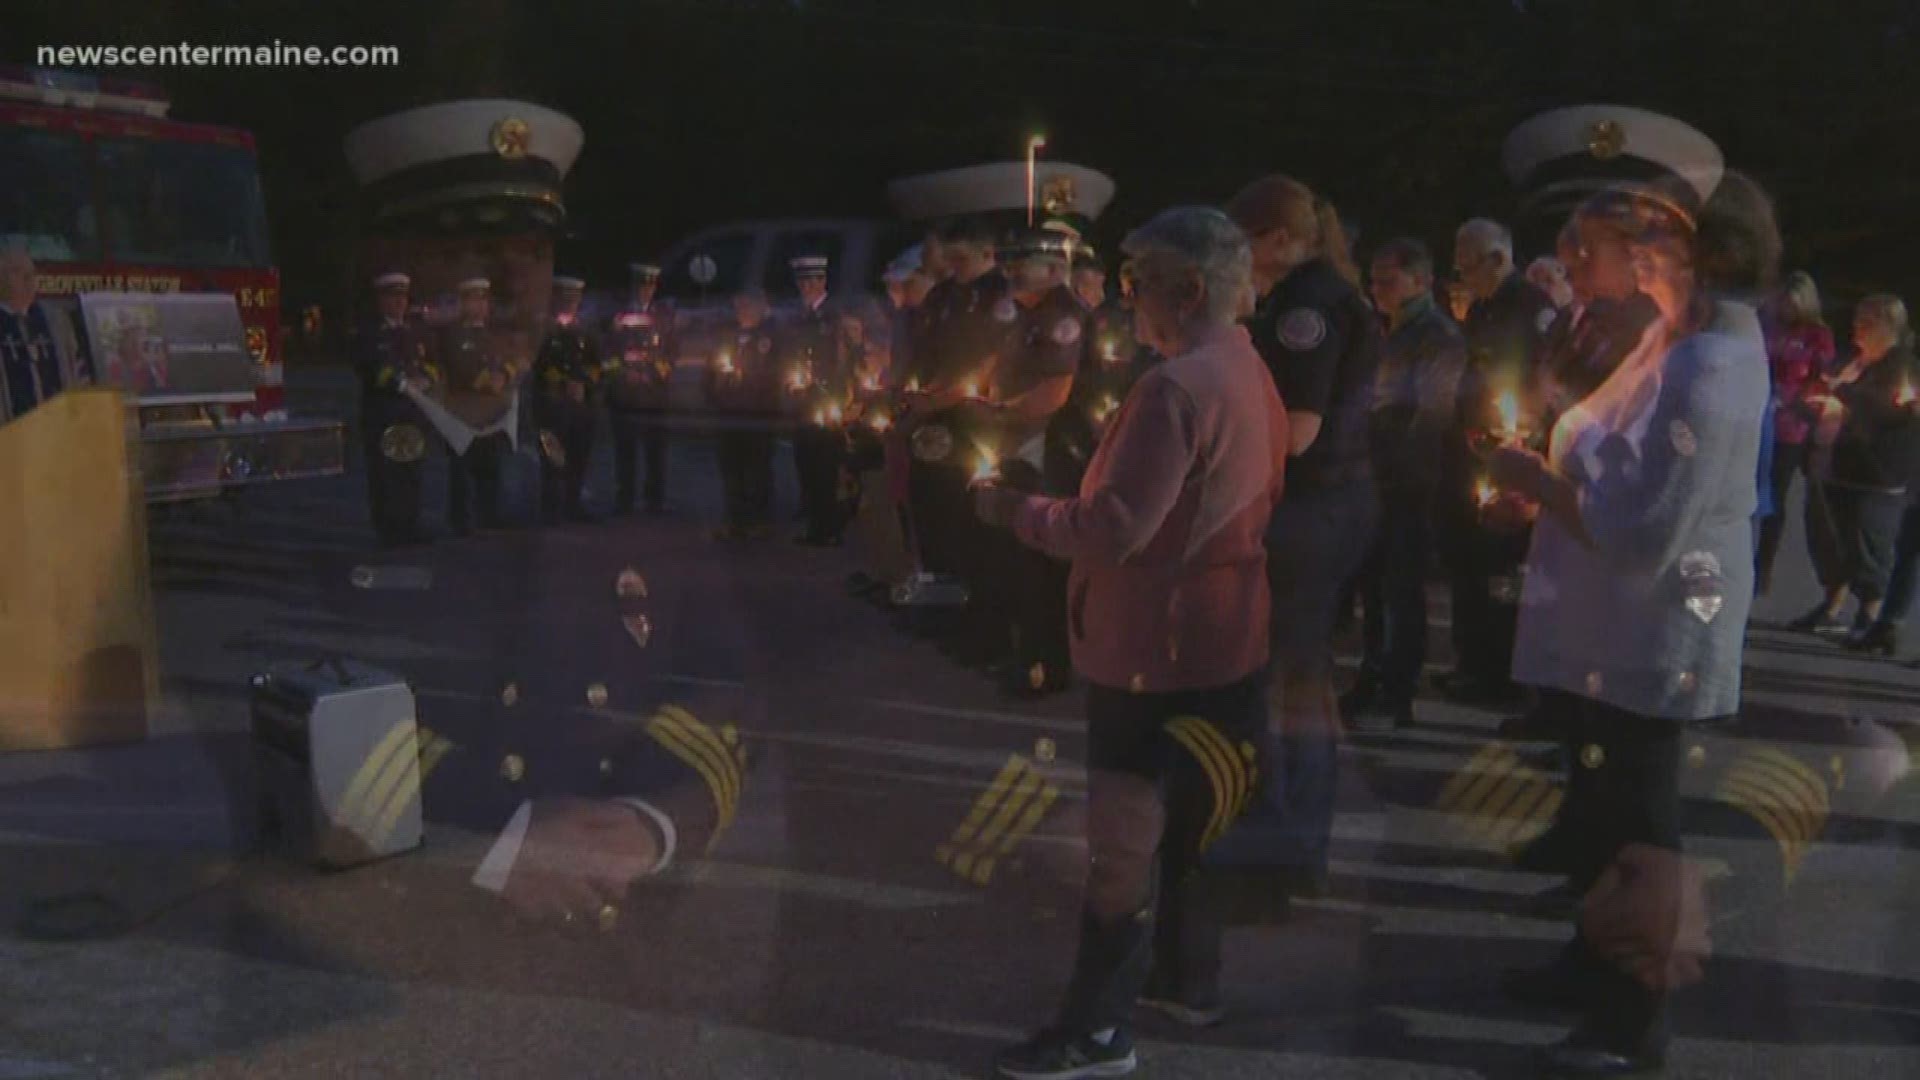 Members of several fire departments in Cumberland County gathered in Buxton Tuesday evening for a candlelight vigil in honor of the Farmington explosion victims.